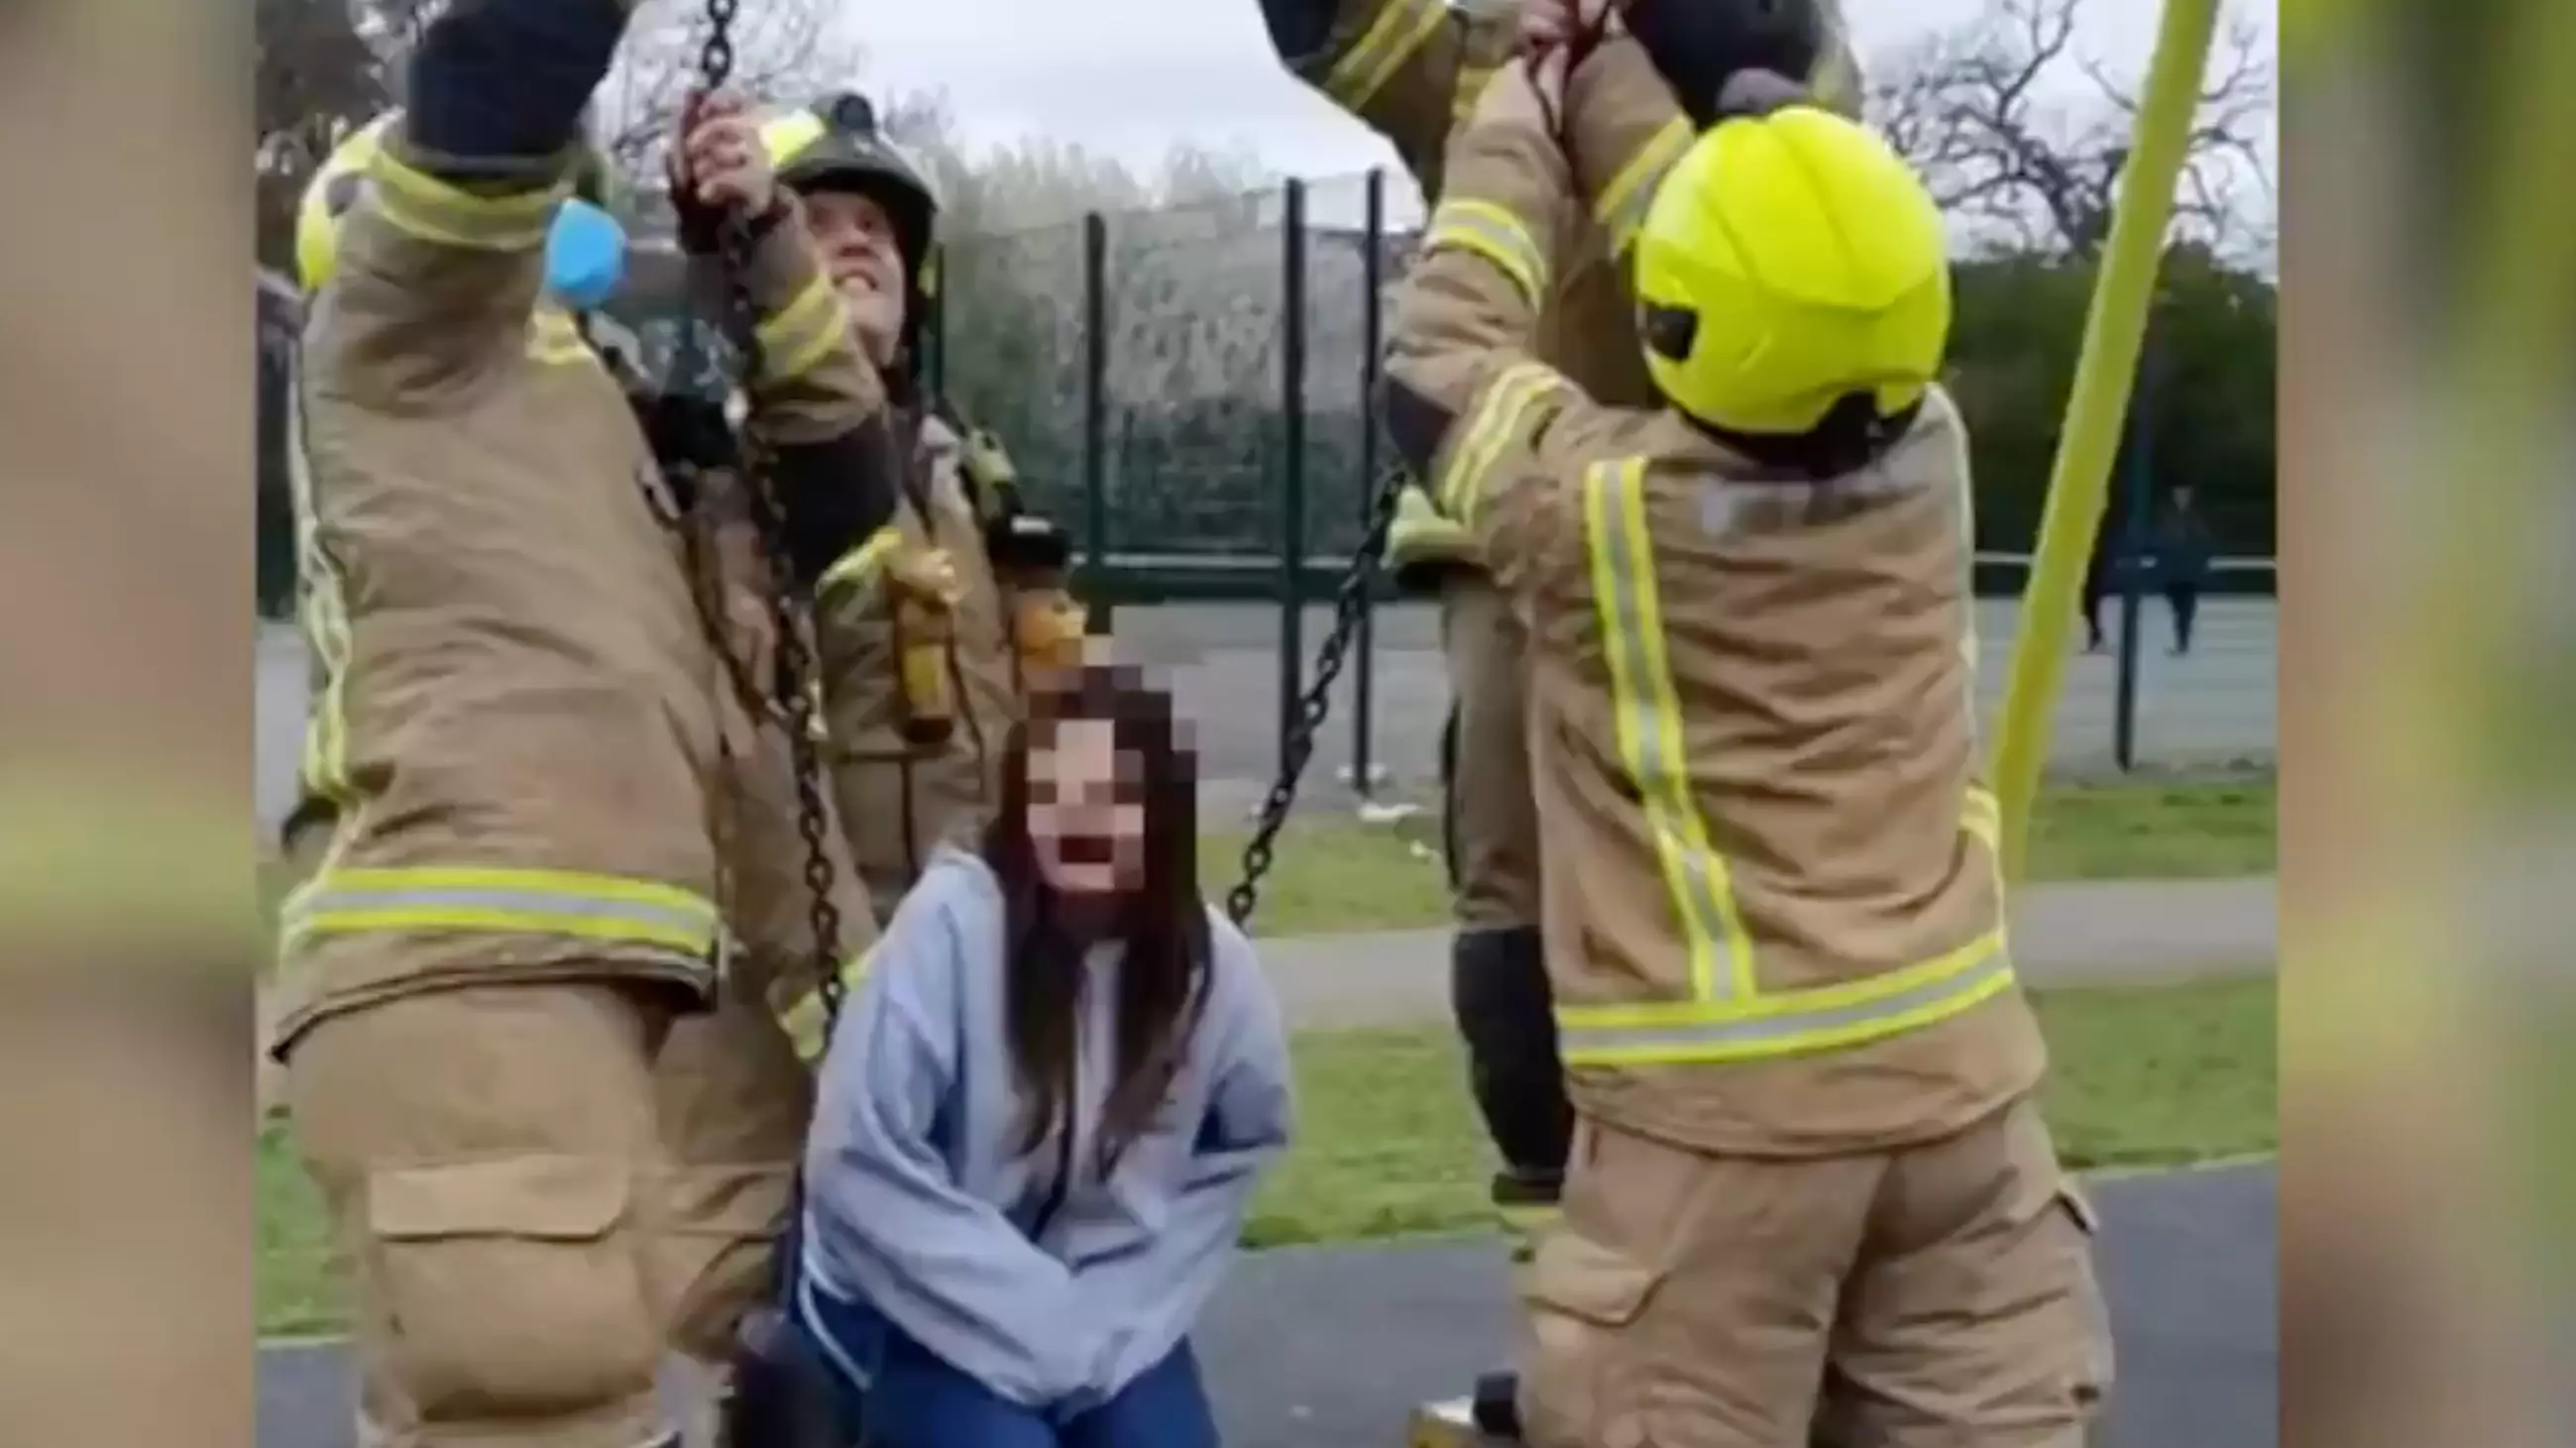 London Fire Brigade Forced To Issue Warning Over TikTok Toddler Swing Craze